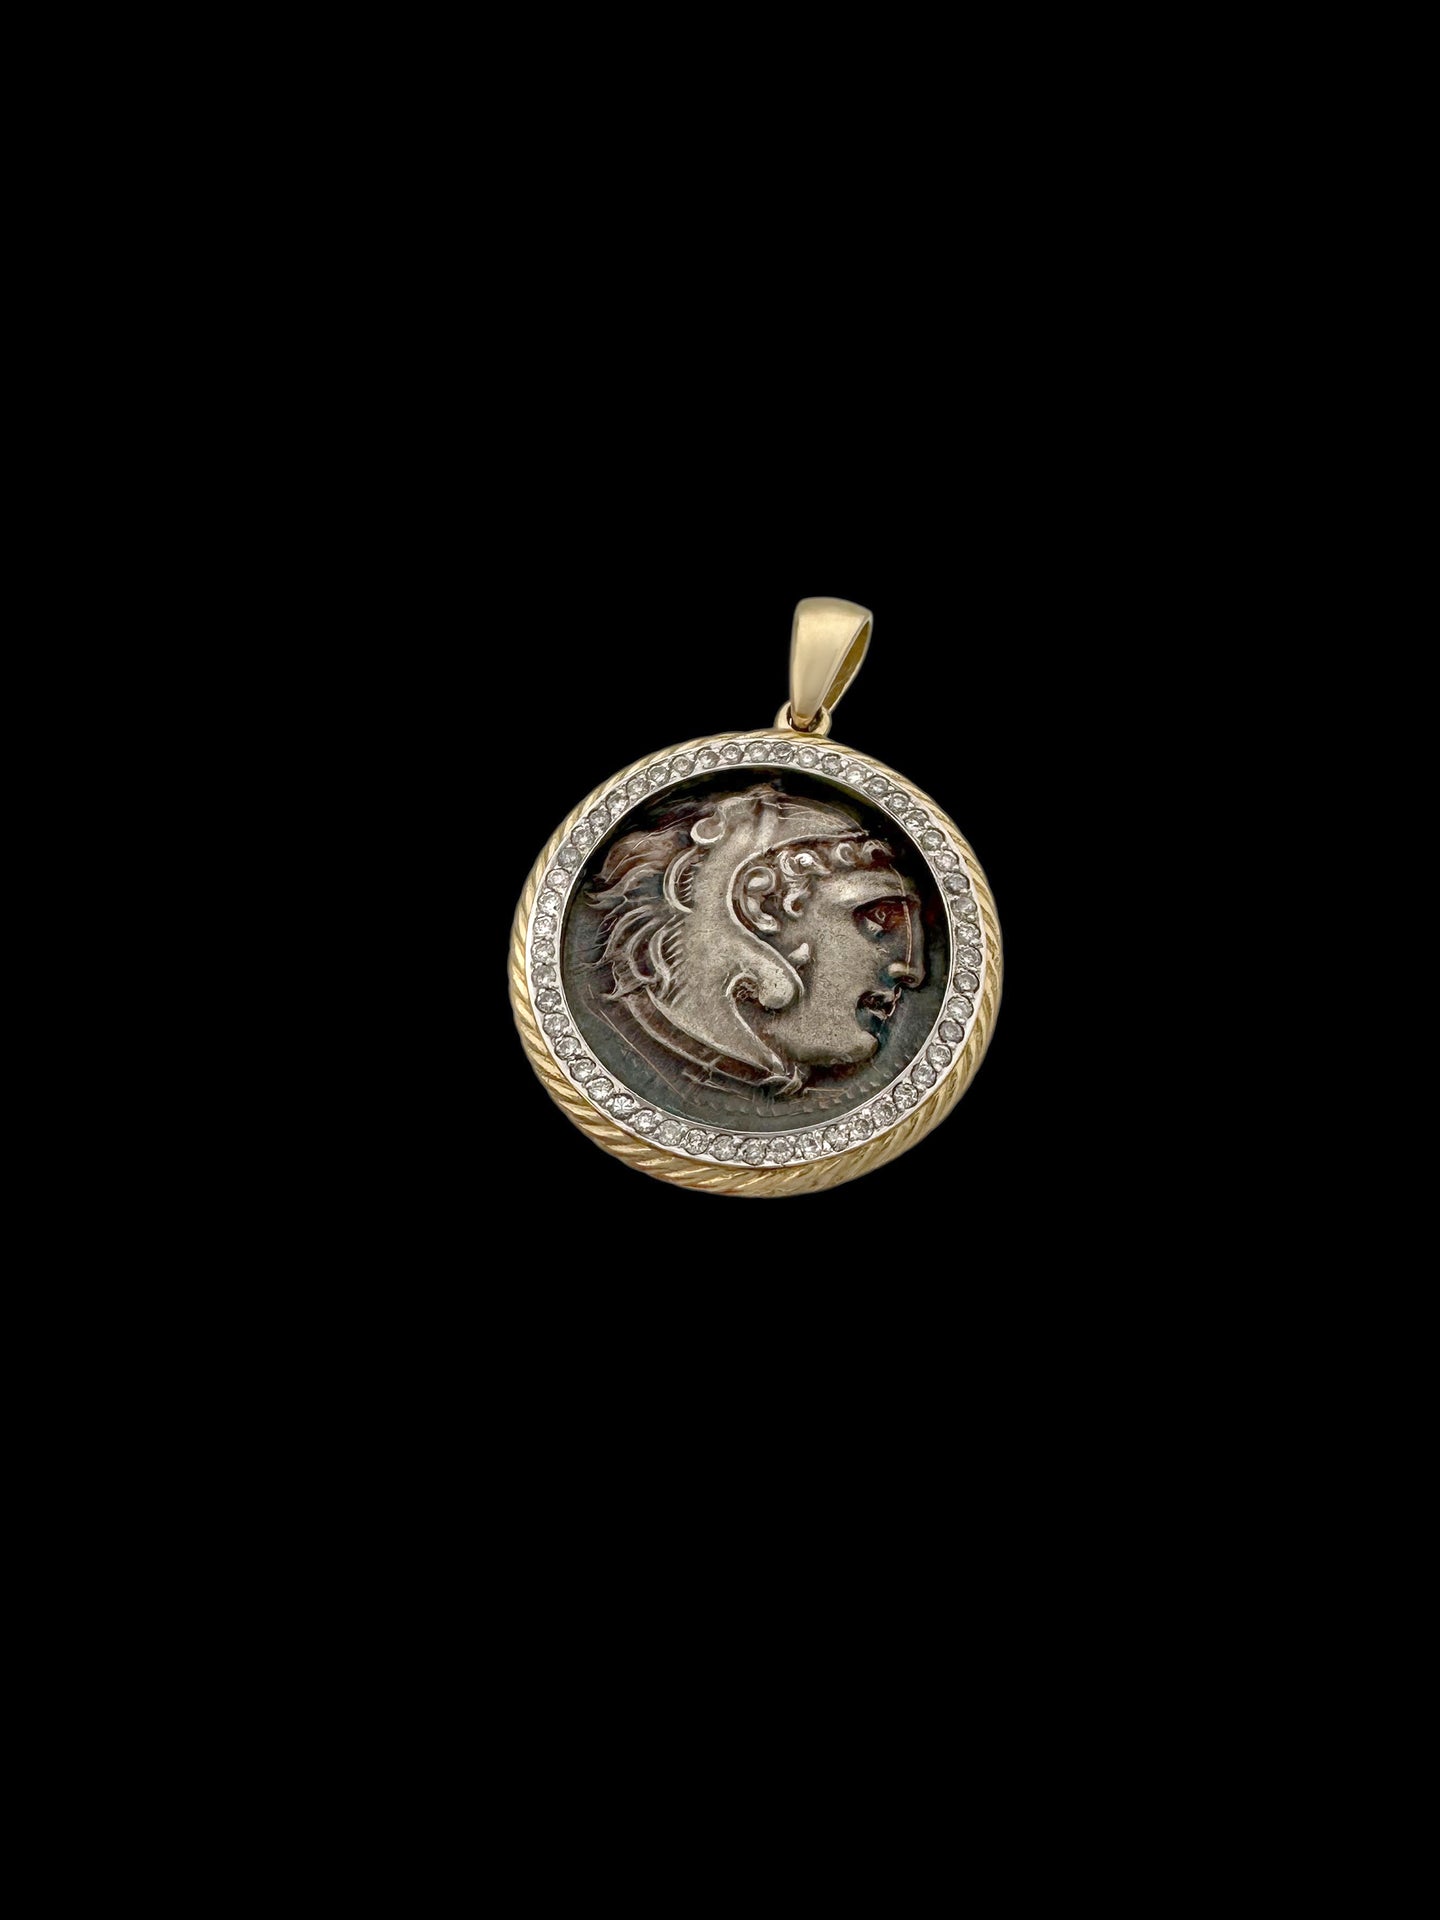 Ancient Alexander the Great Coin Set in 14K Gold & Diamond Pendant